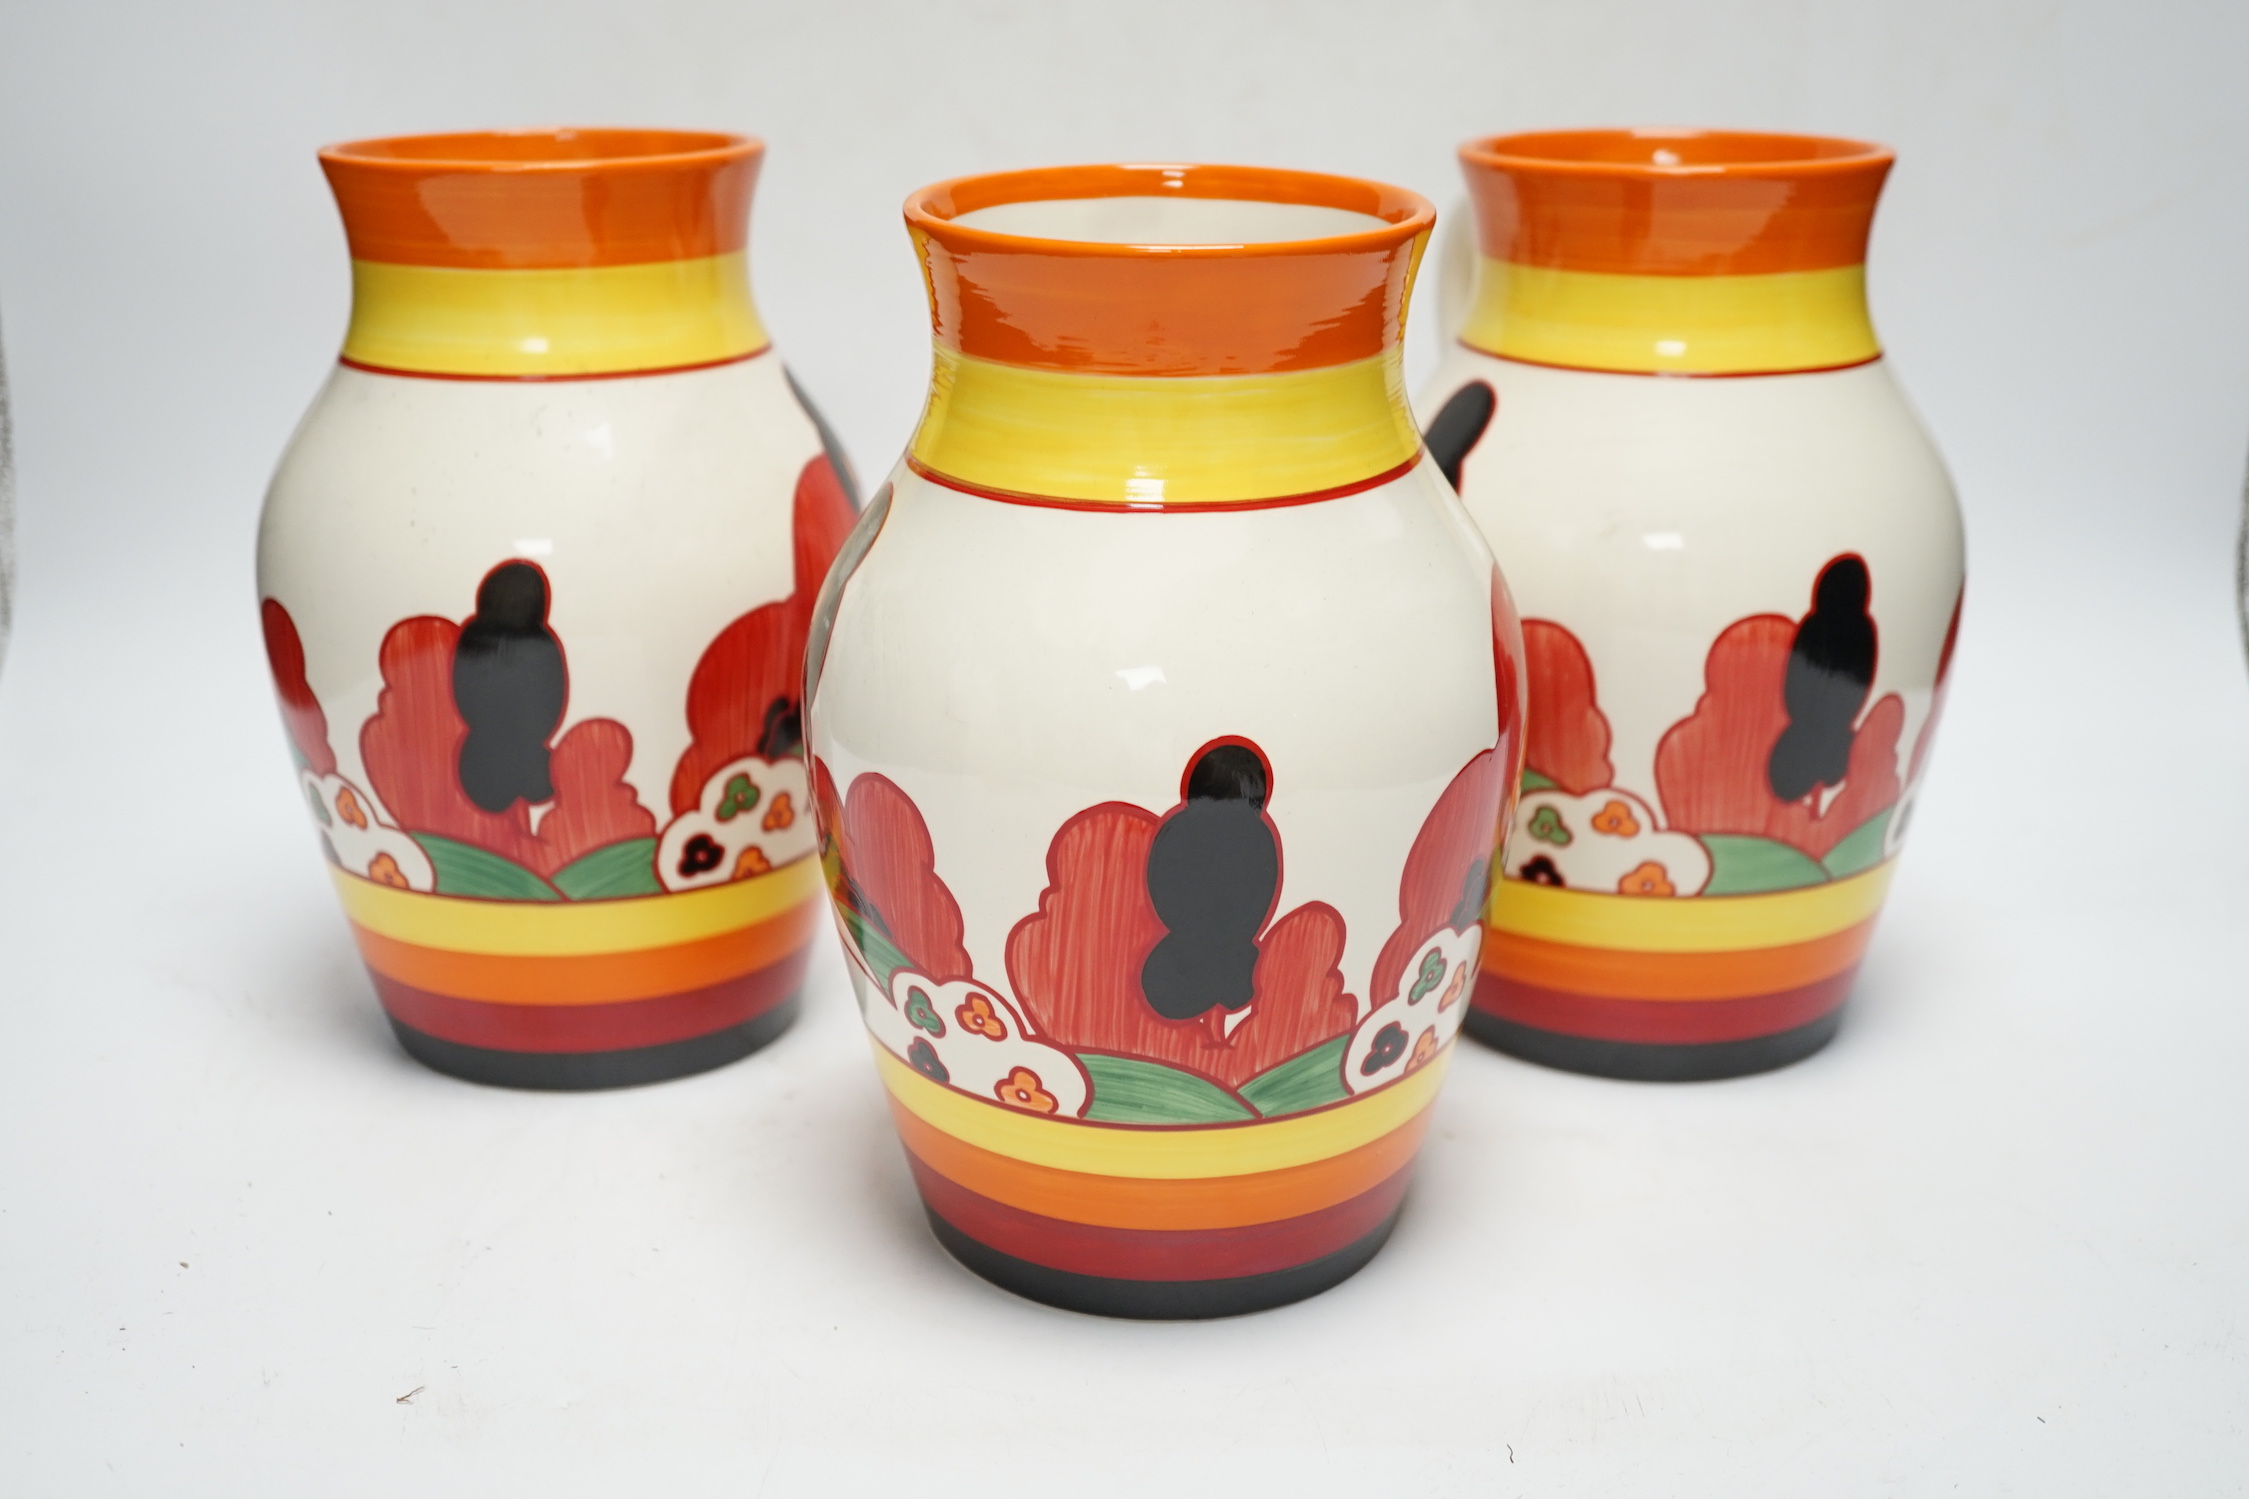 Three Wedgwood Bizarre Clarice Cliff Lotus jugs - Farmhouse pattern, limited edition with boxes and certificates, jugs 20cm high